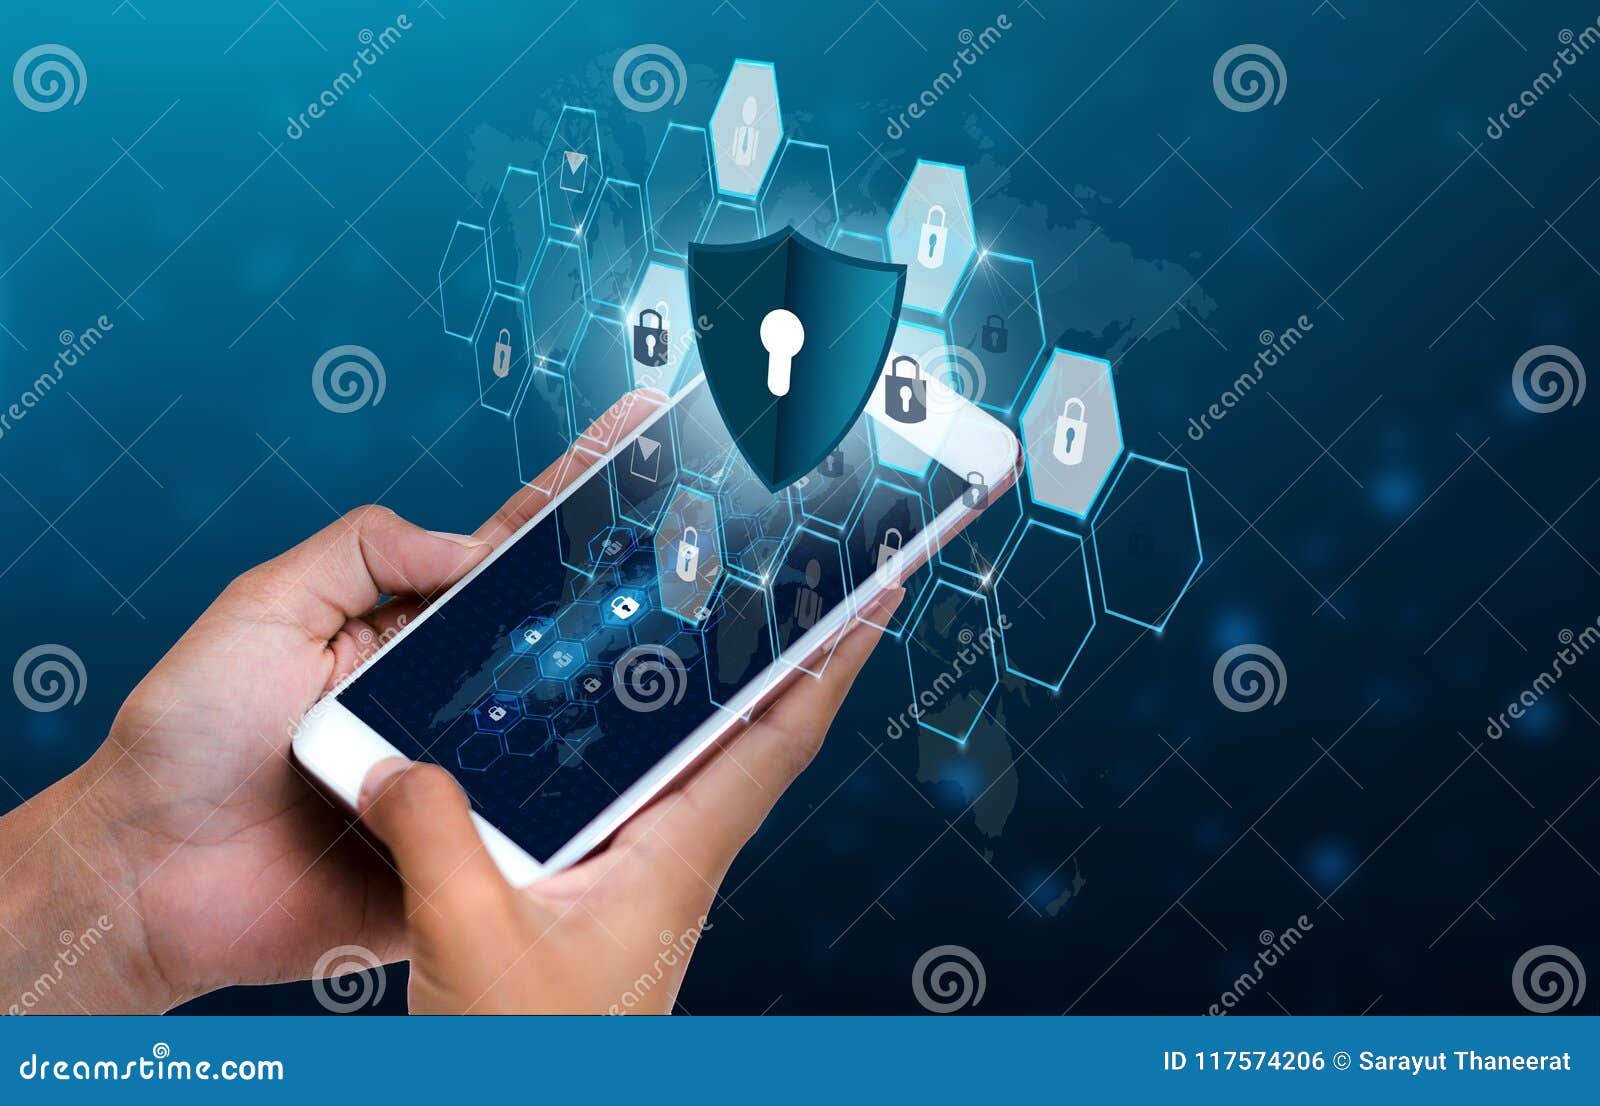 unlocked smartphone lock internet phone hand business people press the phone to communicate in the internet. cyber security concep